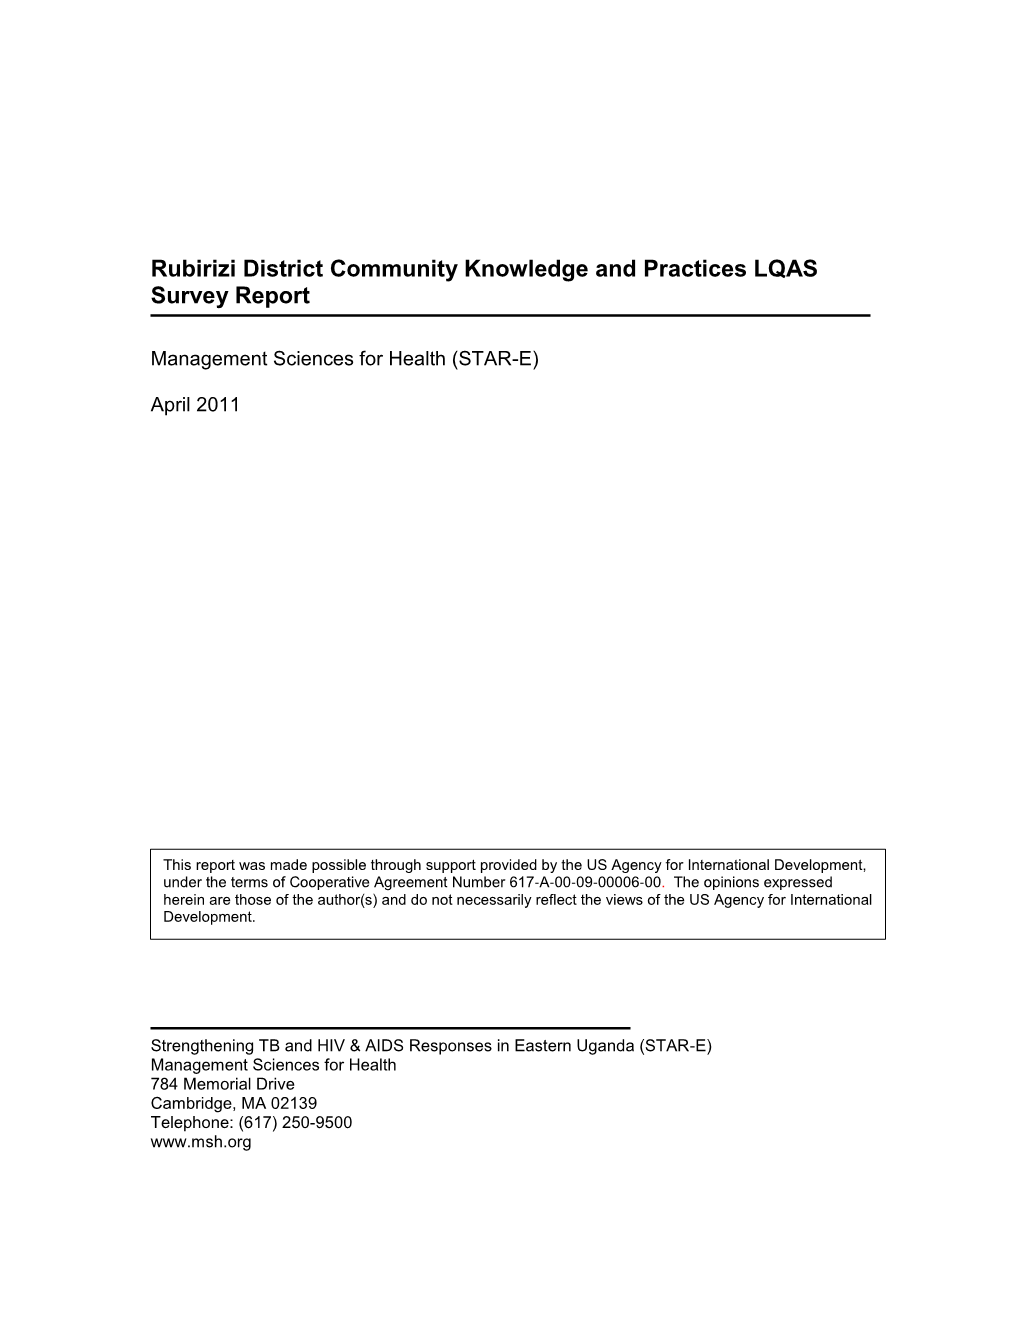 Rubirizi District Community Knowledge and Practices LQAS Survey Report